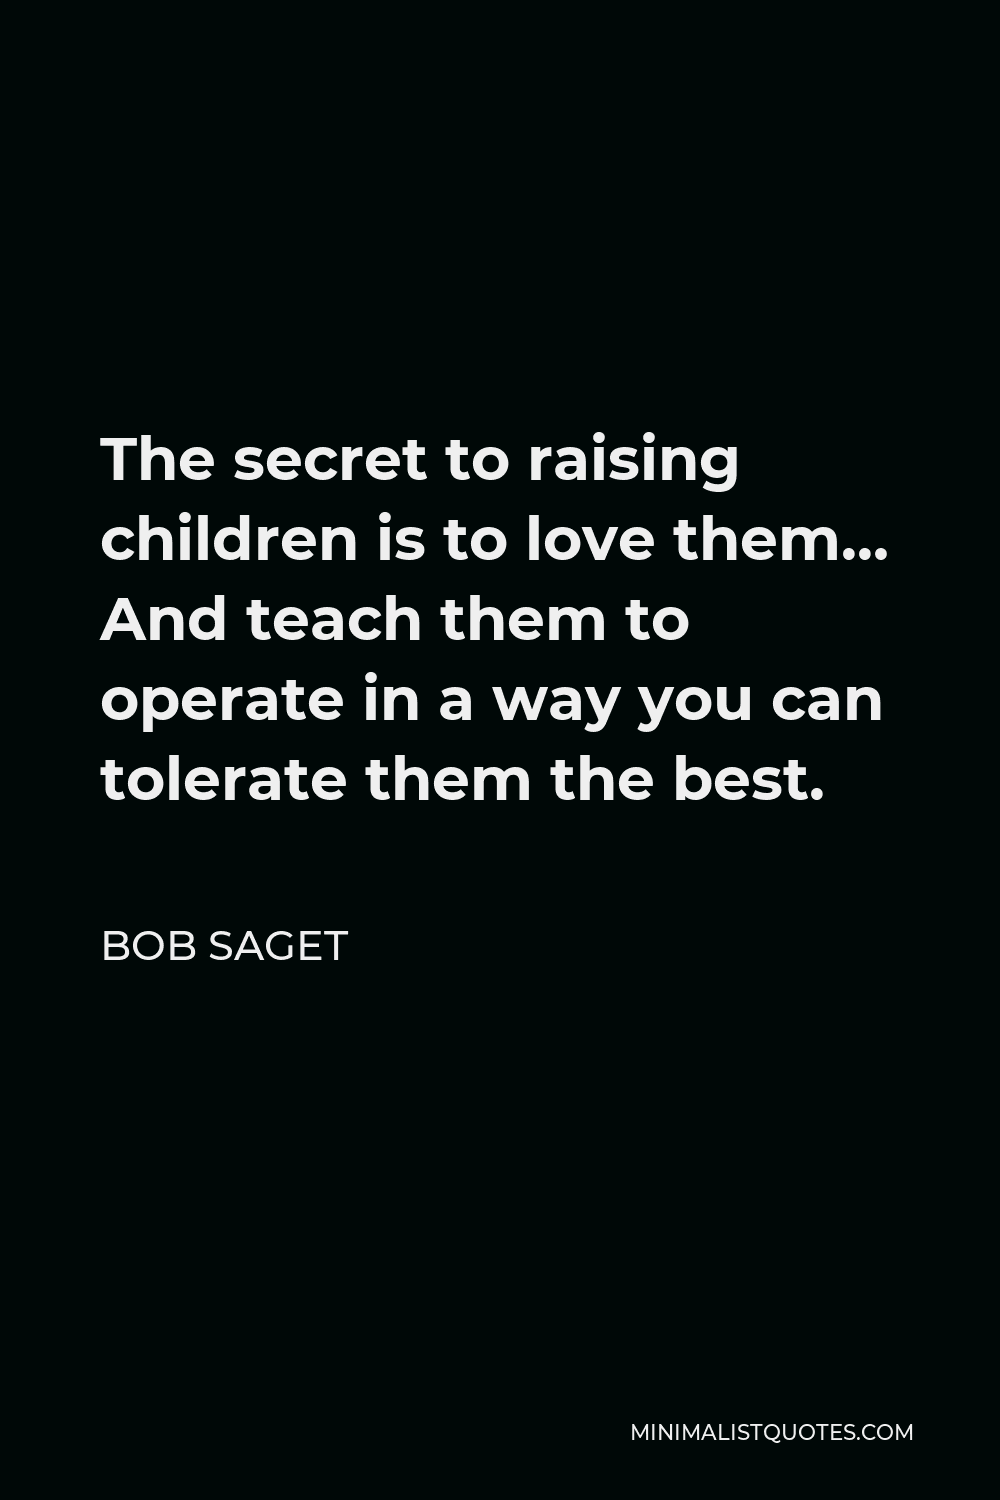 Bob Saget Quote - The secret to raising children is to love them… And teach them to operate in a way you can tolerate them the best.